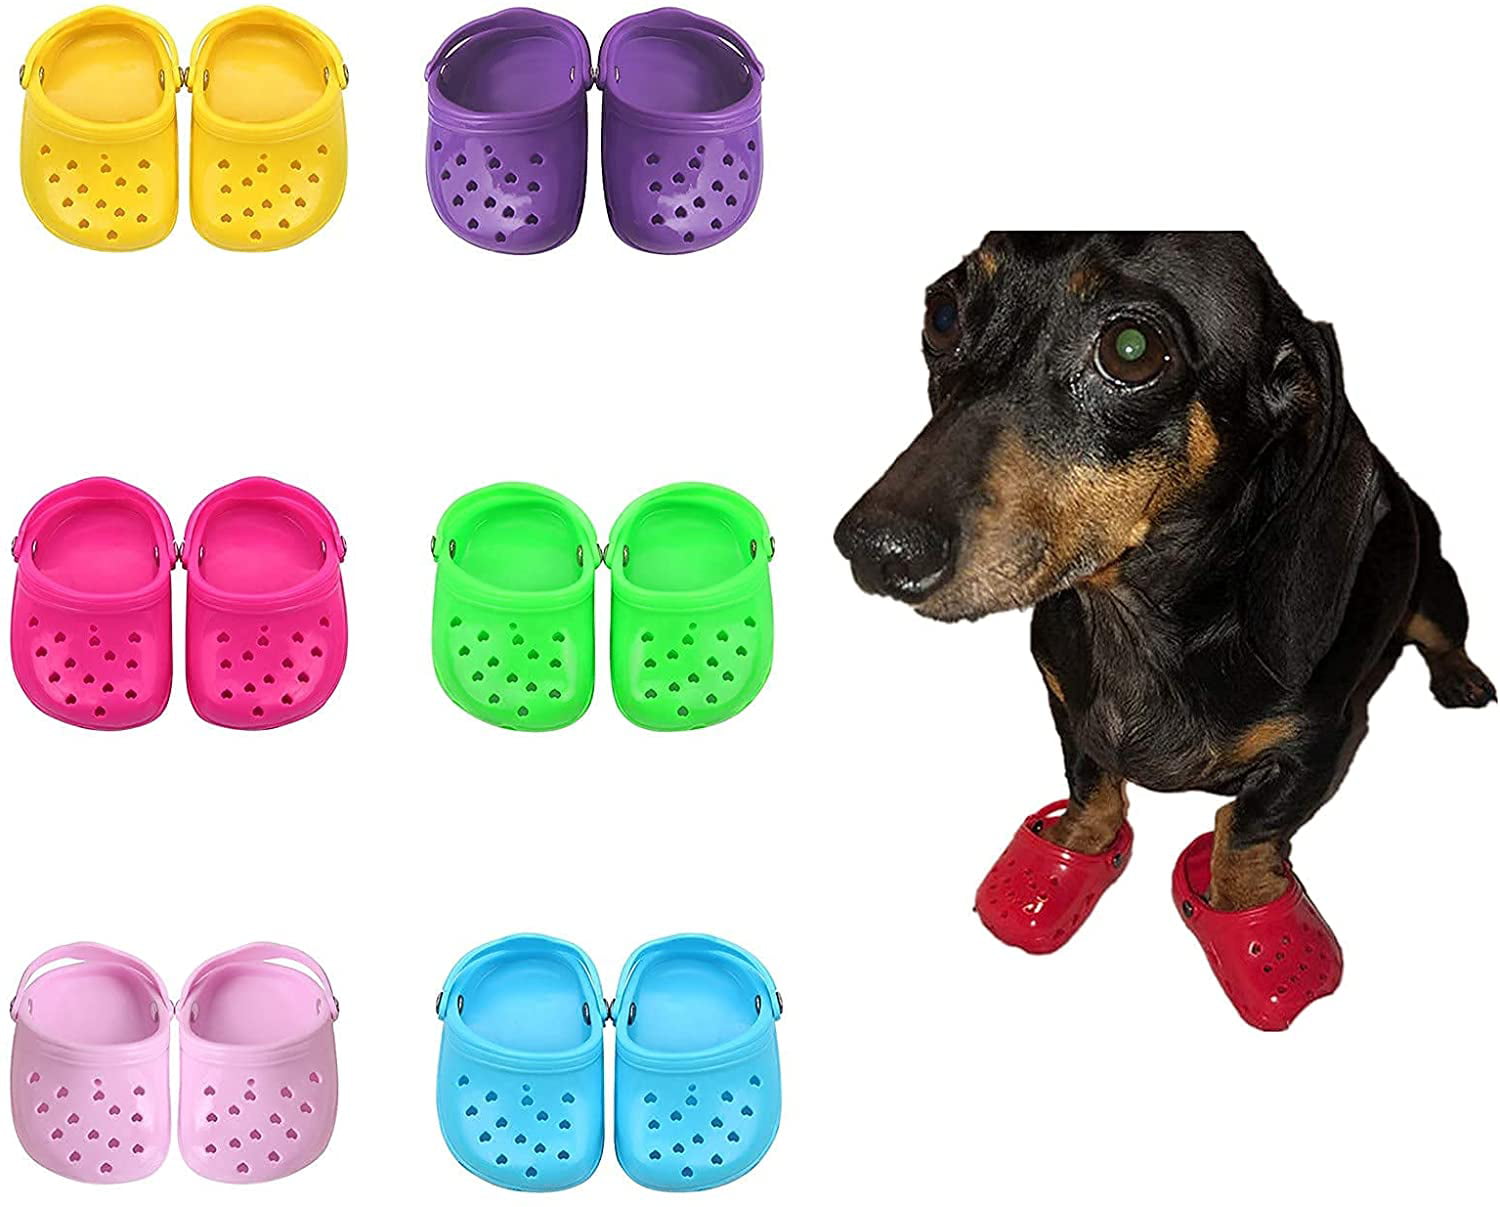 Breathable Mesh Dog Sandals with Rugged Anti-Slip Sole Adjustable Breathable Comfortable Dog Shoes for Spring and Summer TikTok Pet Dog Shoes Lovely Dog Shoes for Small Dogs Pink, 4PC 